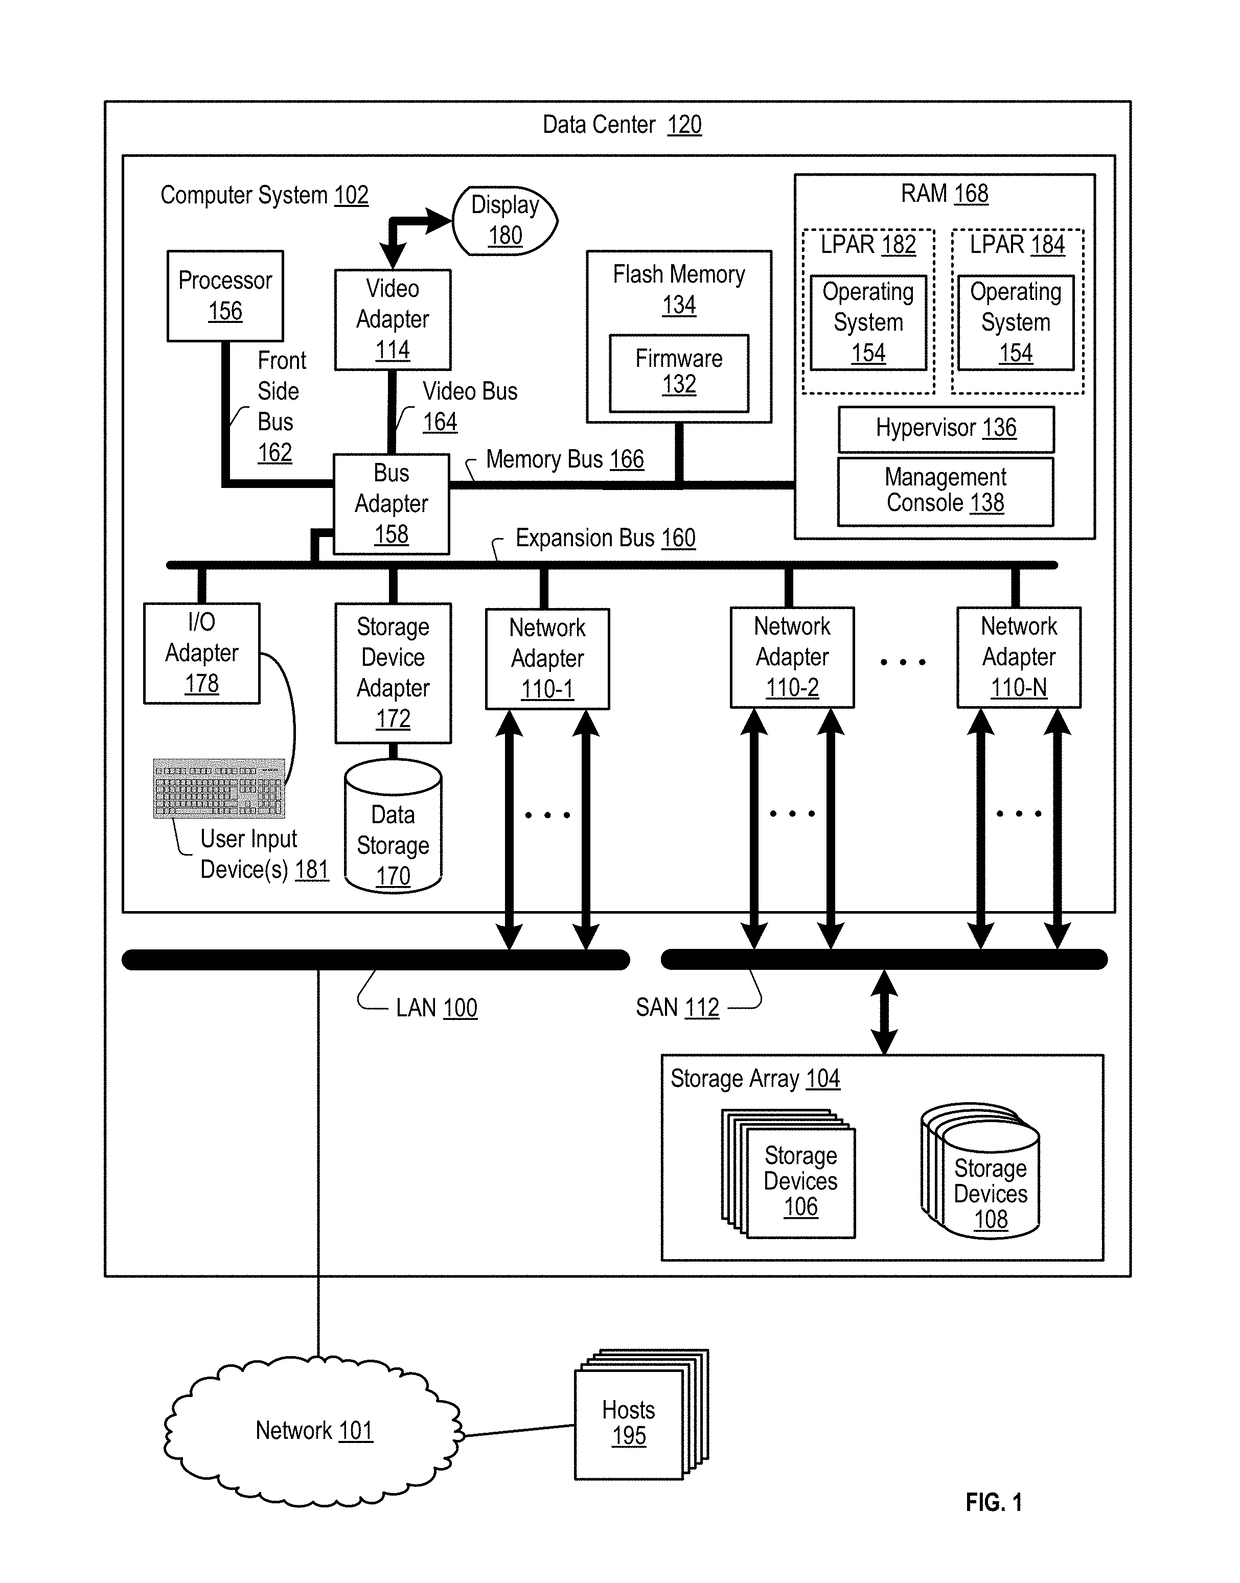 Migrating single root I/O virtualization adapter configurations in a computing system